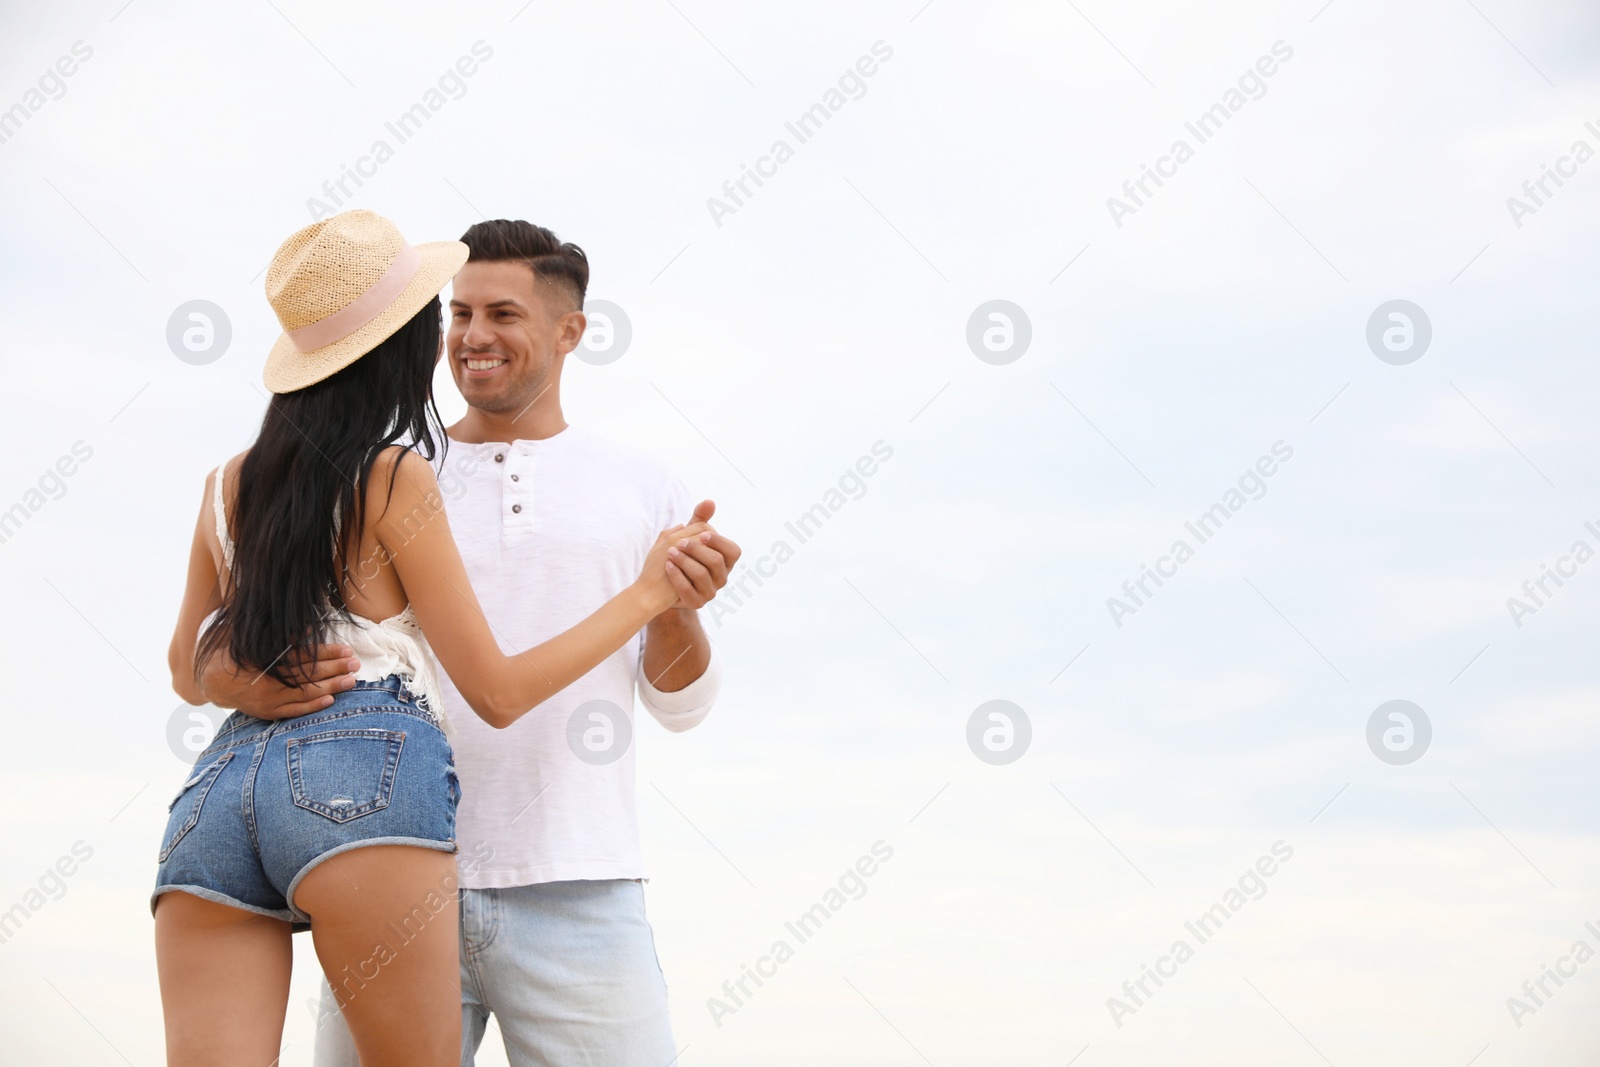 Photo of Lovely couple spending time together outdoors. Space for text